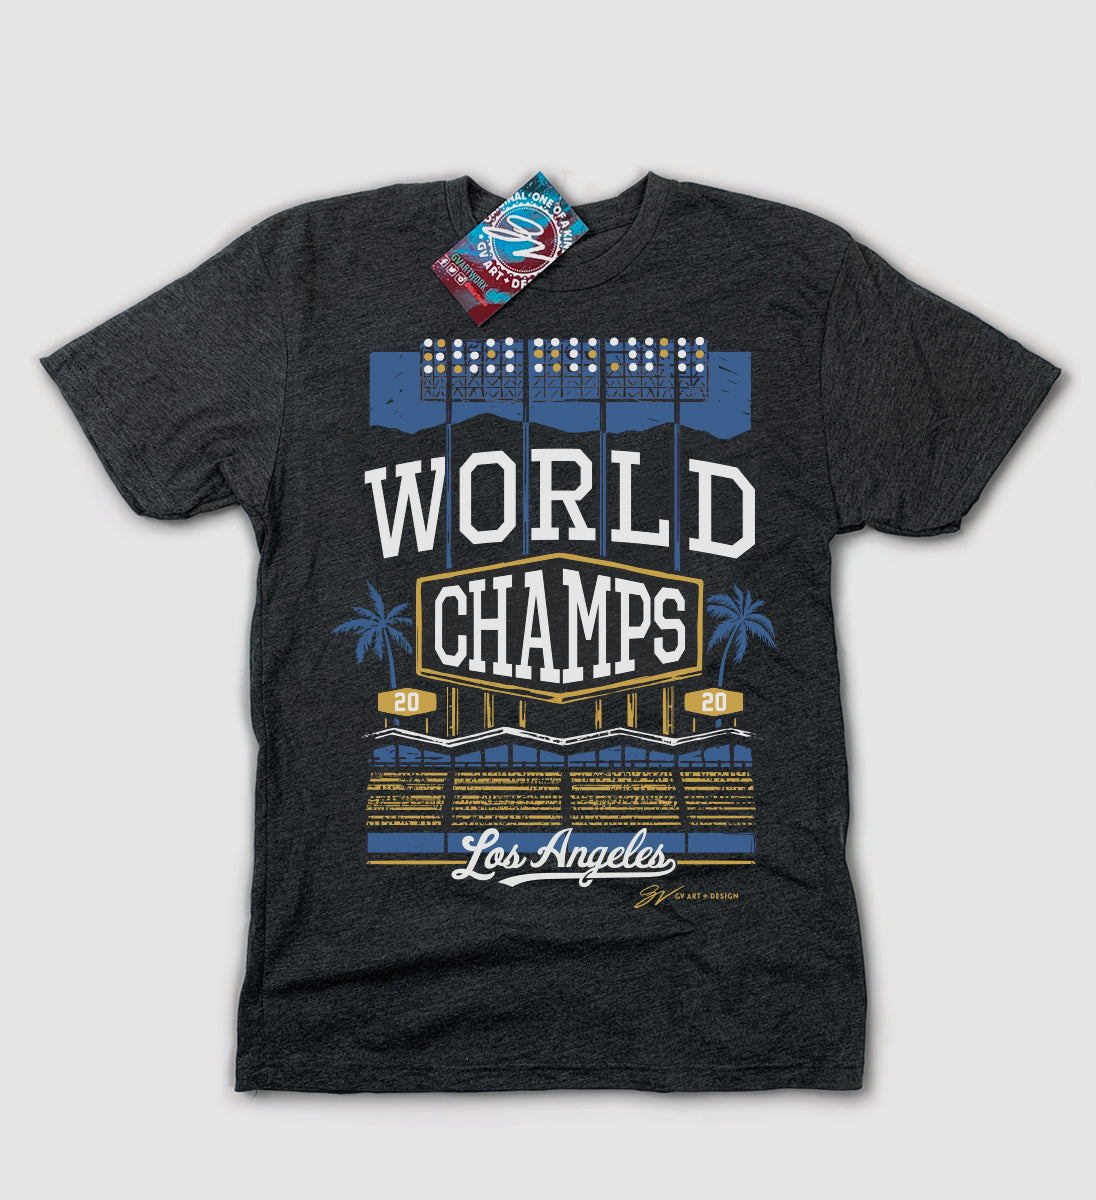 Los Angeles World Champs 2020 T shirt